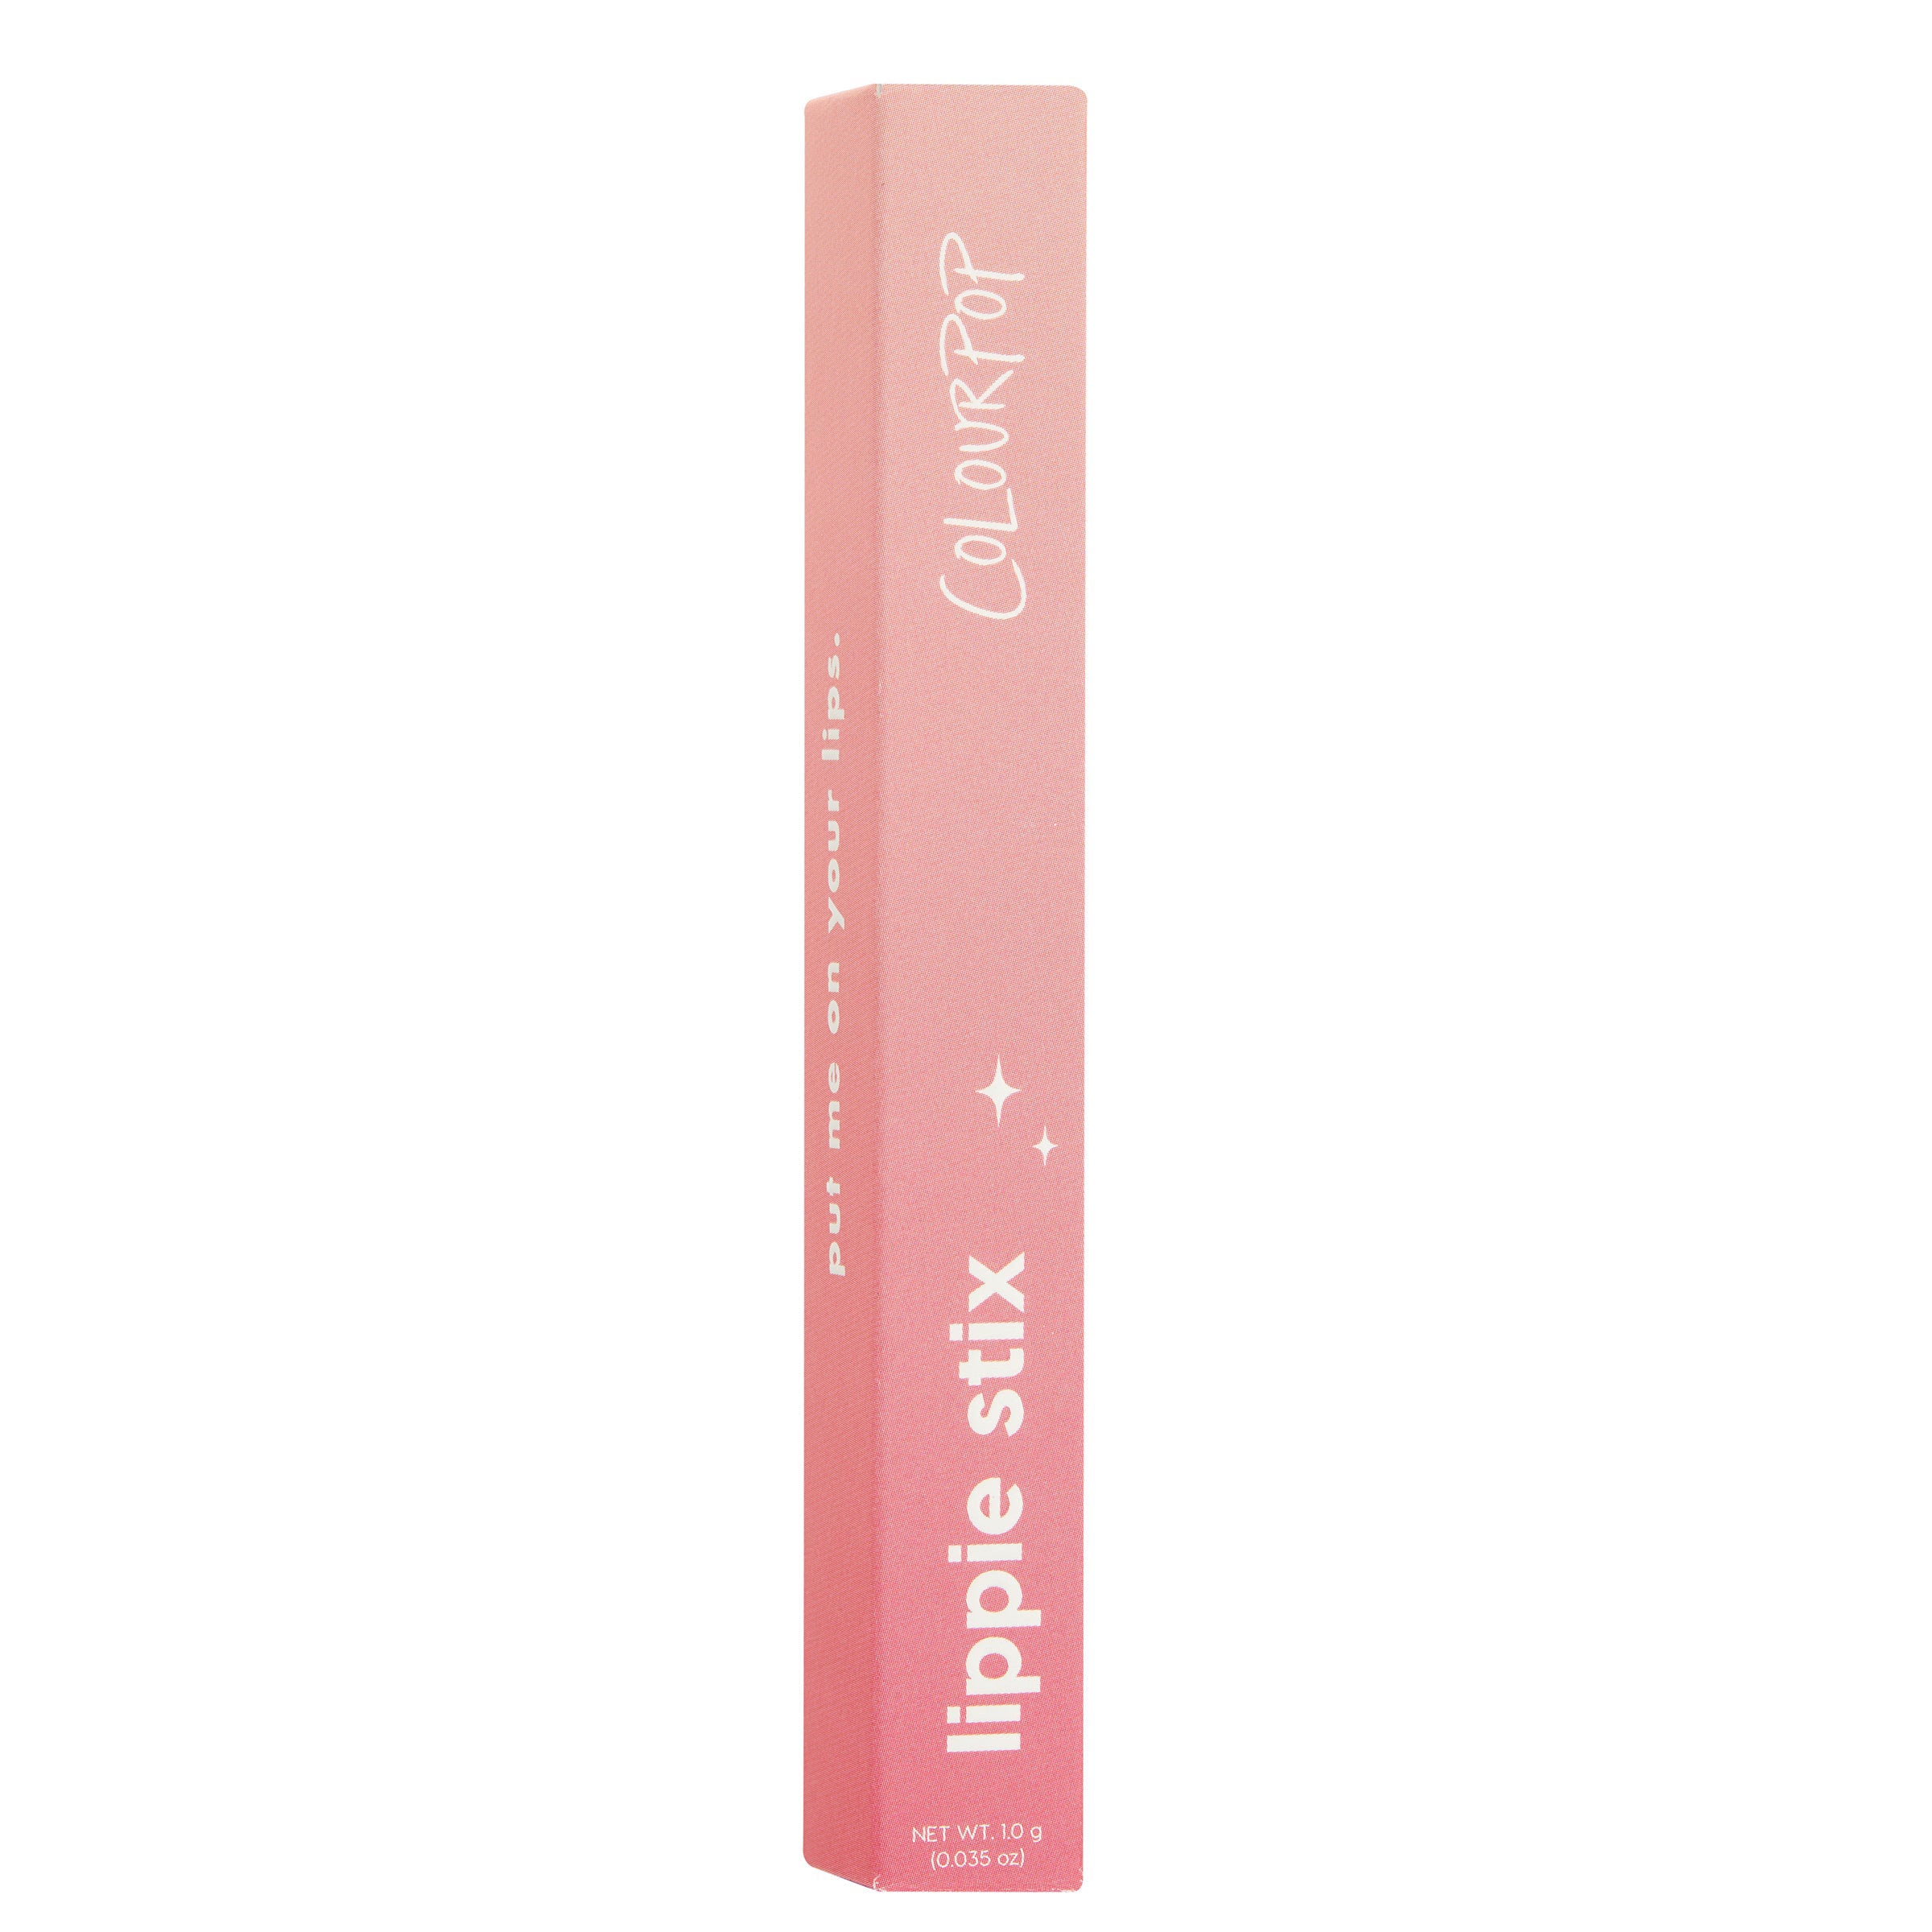 ColourPop Lippie Stix in Brat Pack, a pinky nude shade packaging